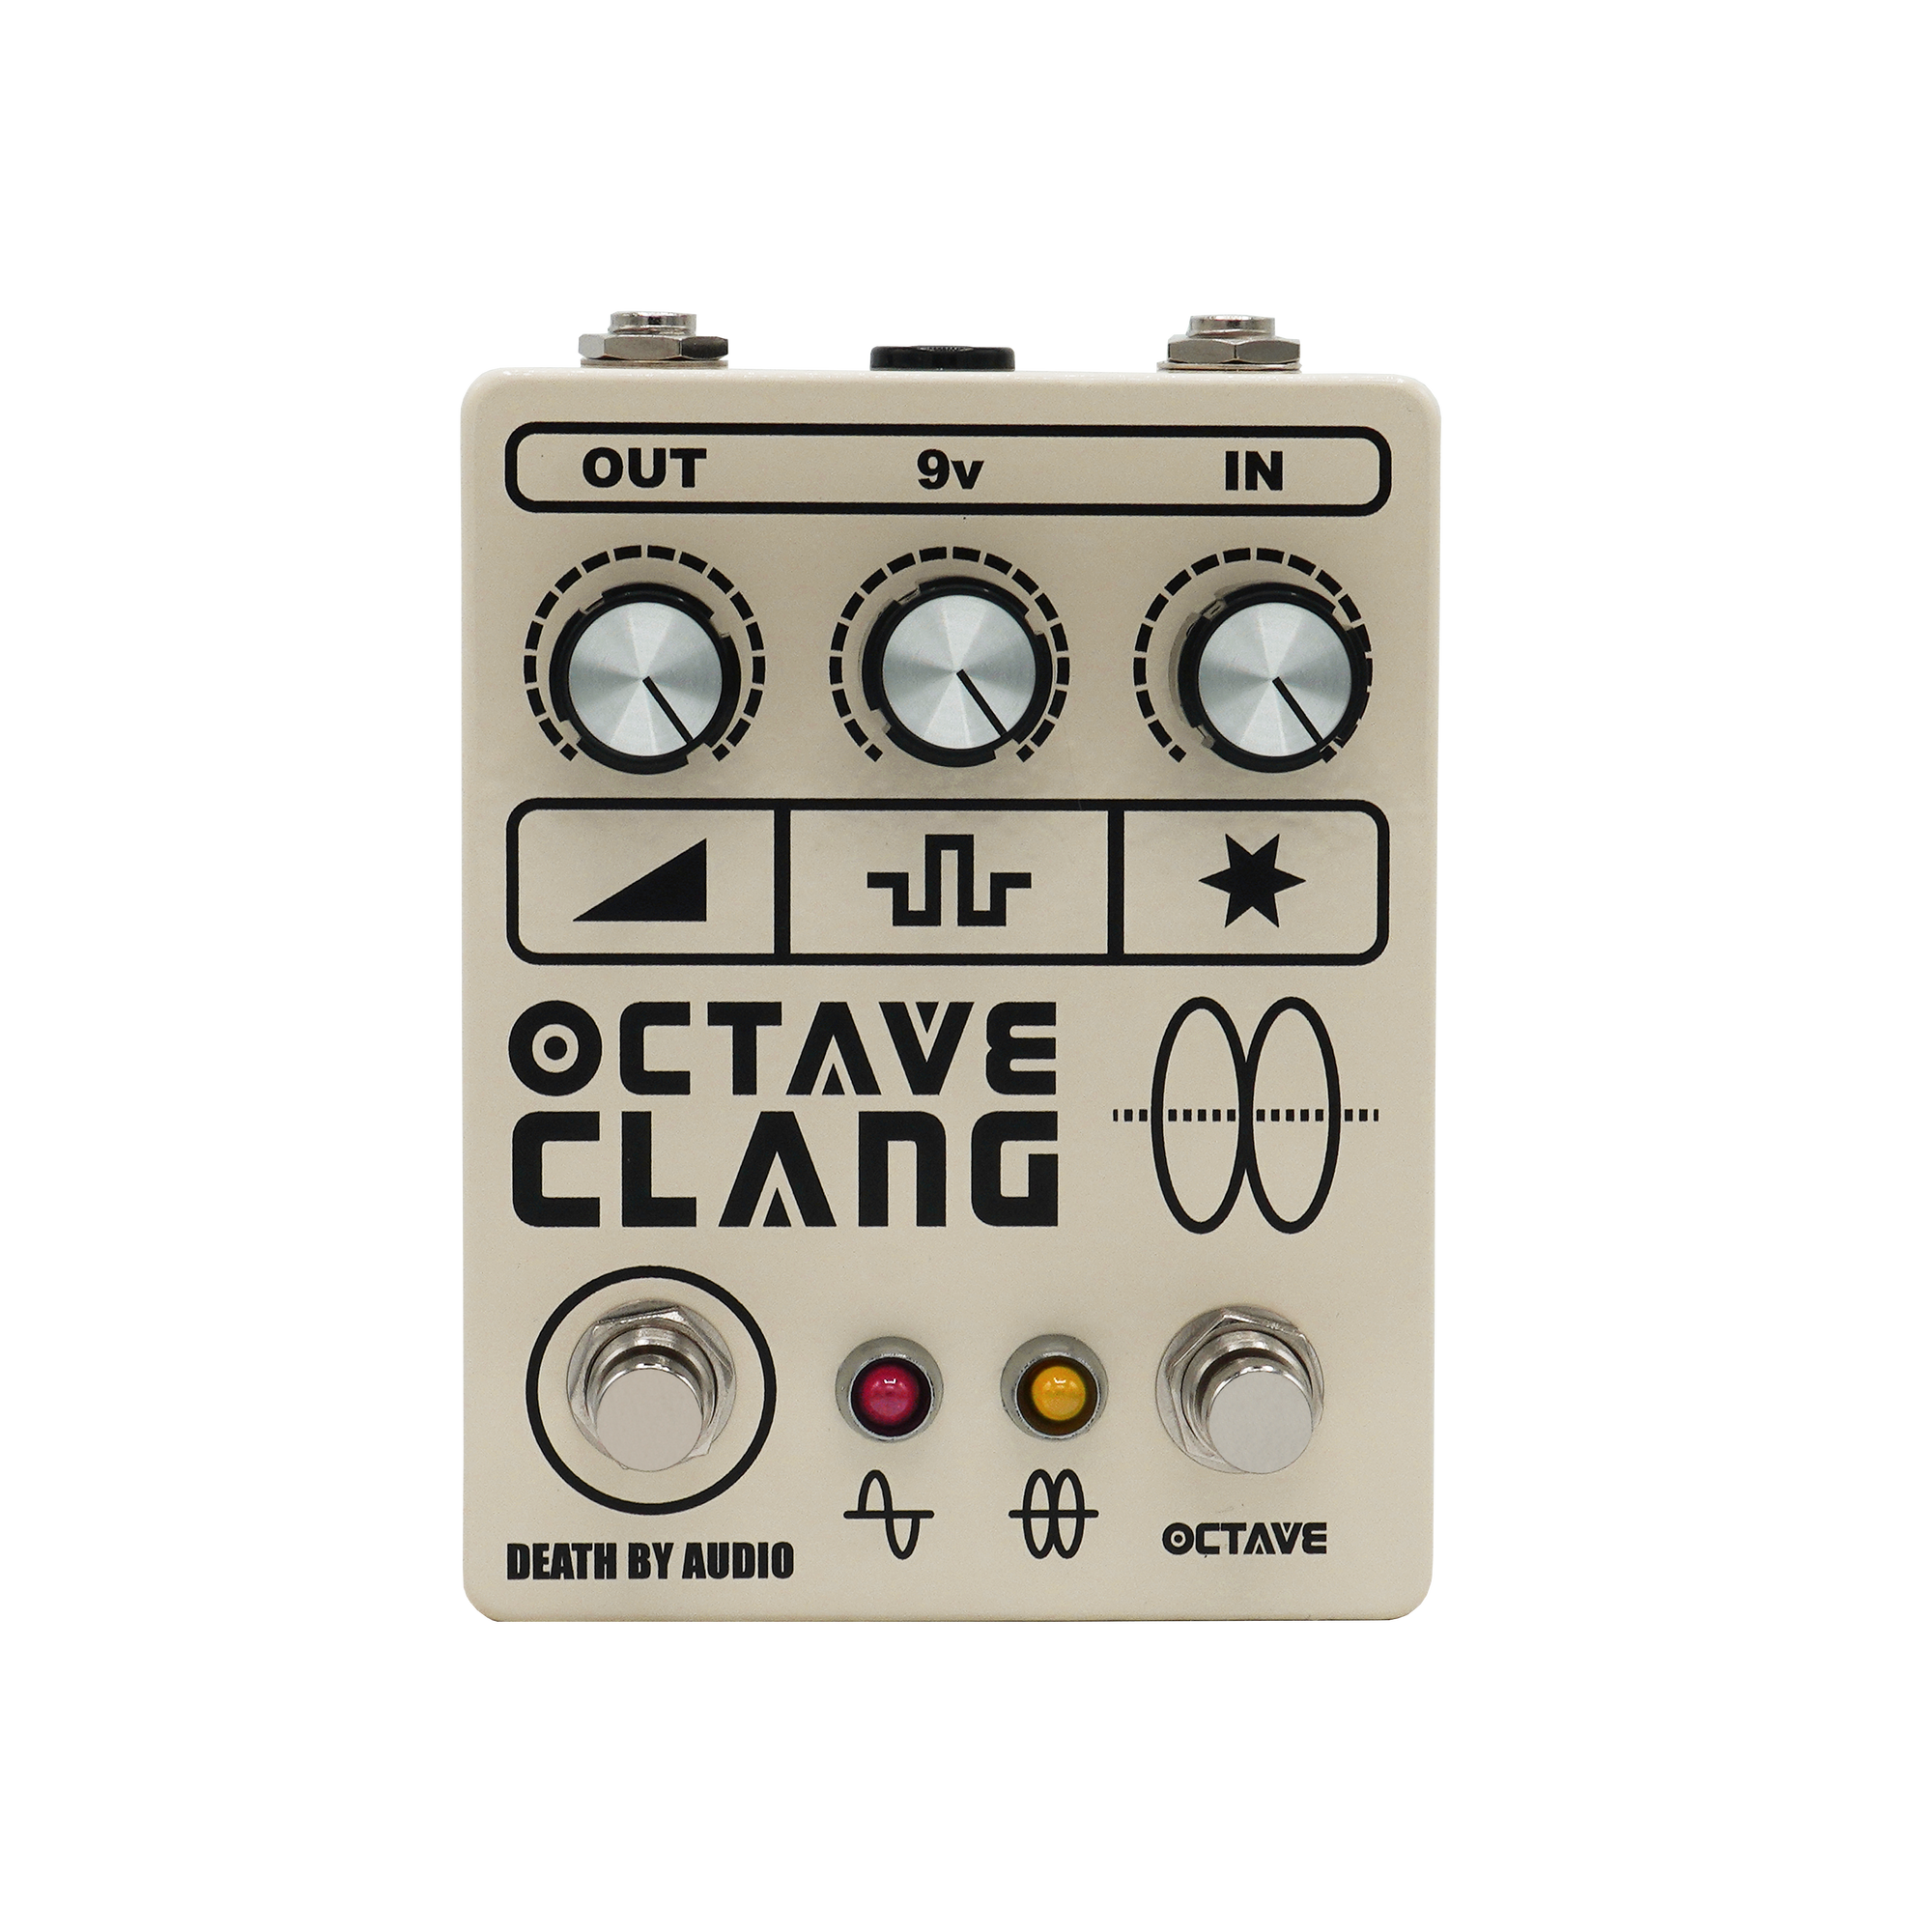 Front view of the octave clang pedal. Custom graphics or each control. Three control knobs and two stomp switches red and yellow LEDs